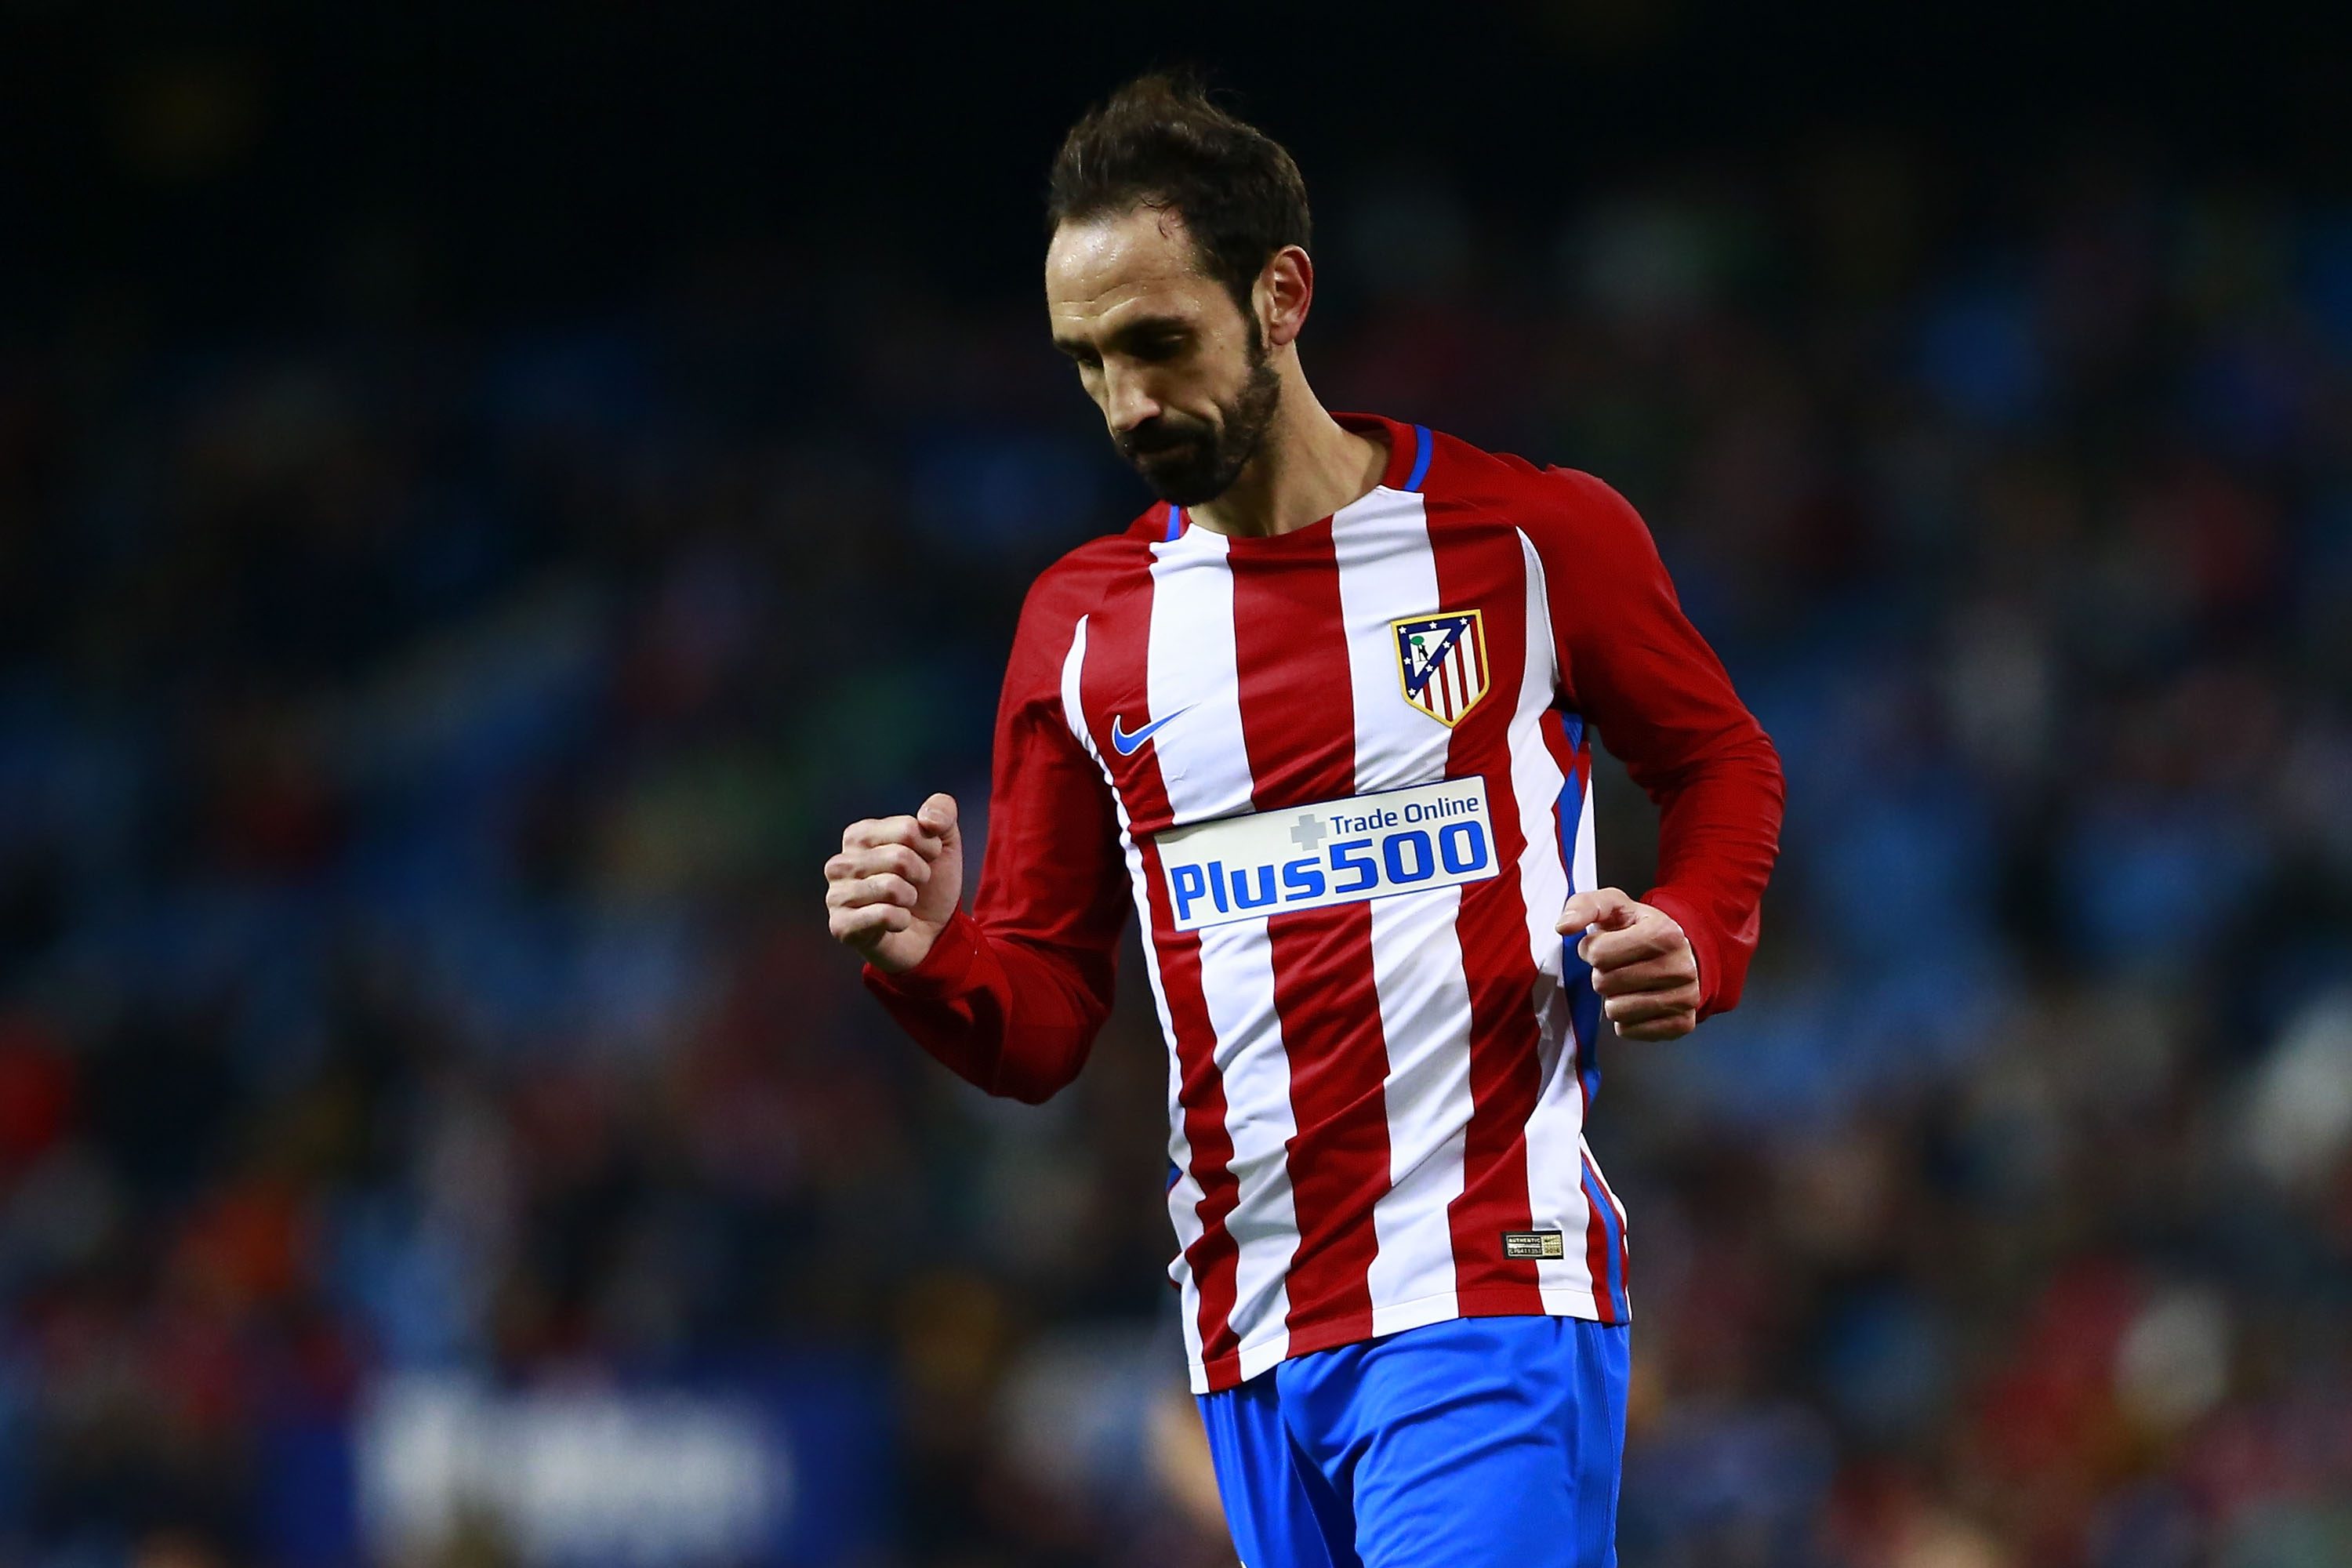 MADRID, SPAIN - DECEMBER 20: Juan Francisco Torres alias Juanfran of Atletico de Madrid celebrates scoring their third goal during the Copa del Rey Round of 16 match between Club Atletico de Madrid and CD Guijuelo at Vicente Calderon stadium  on December 20, 2016 in Madrid, Spain. (Photo by Gonzalo Arroyo Moreno/Getty Images)